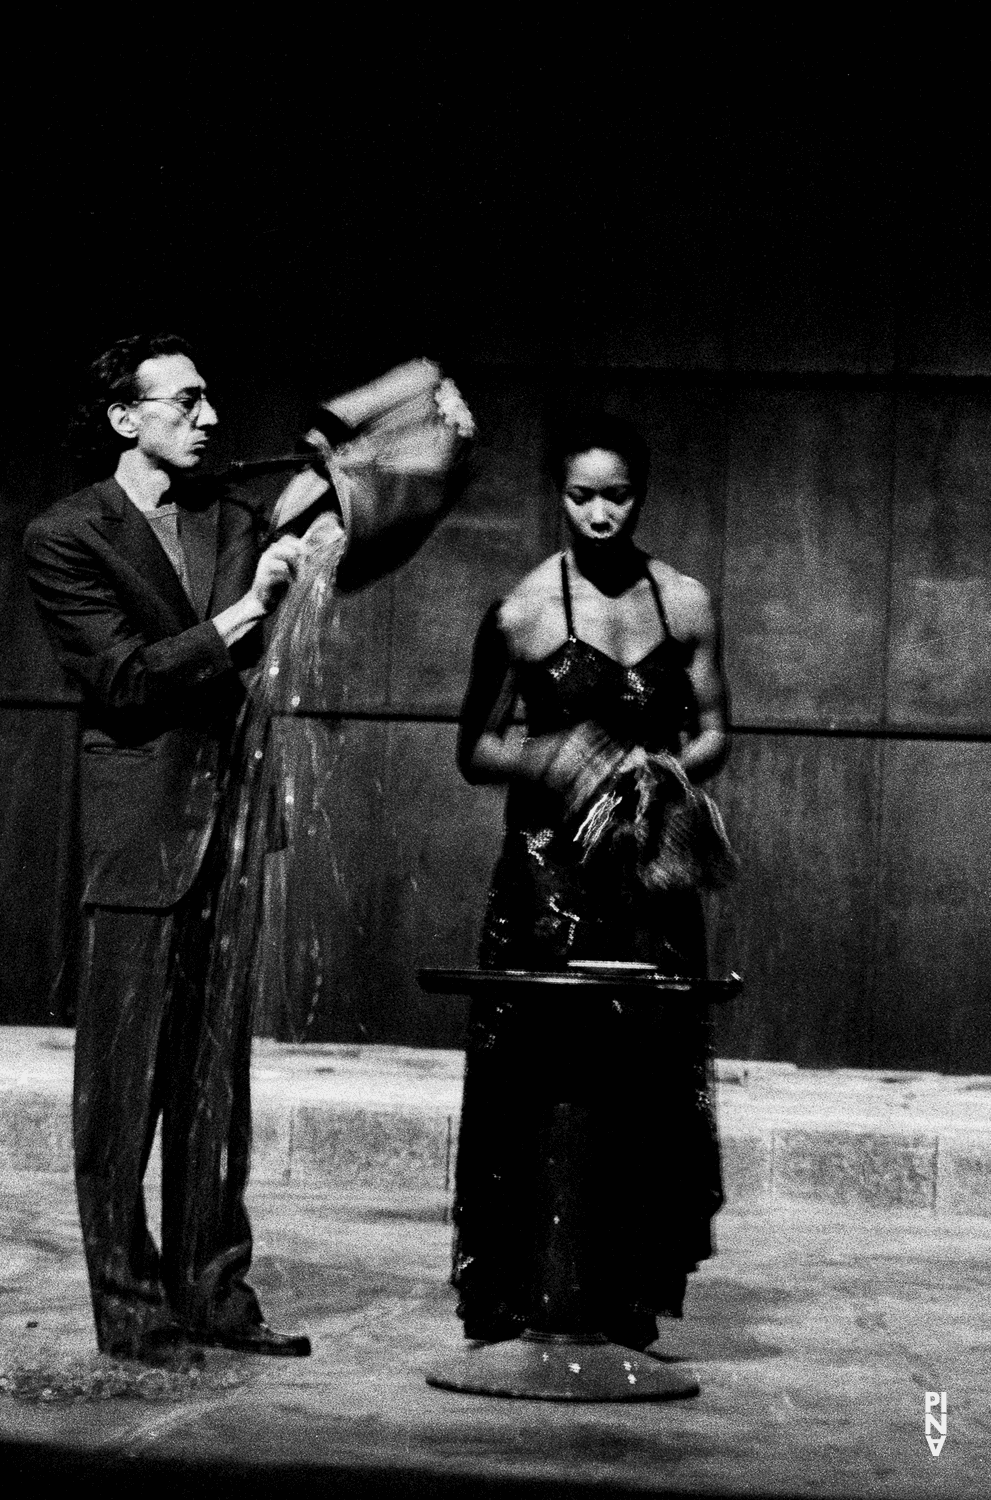 Jean Laurent Sasportes and Quincella Swyningan in “Palermo Palermo” by Pina Bausch